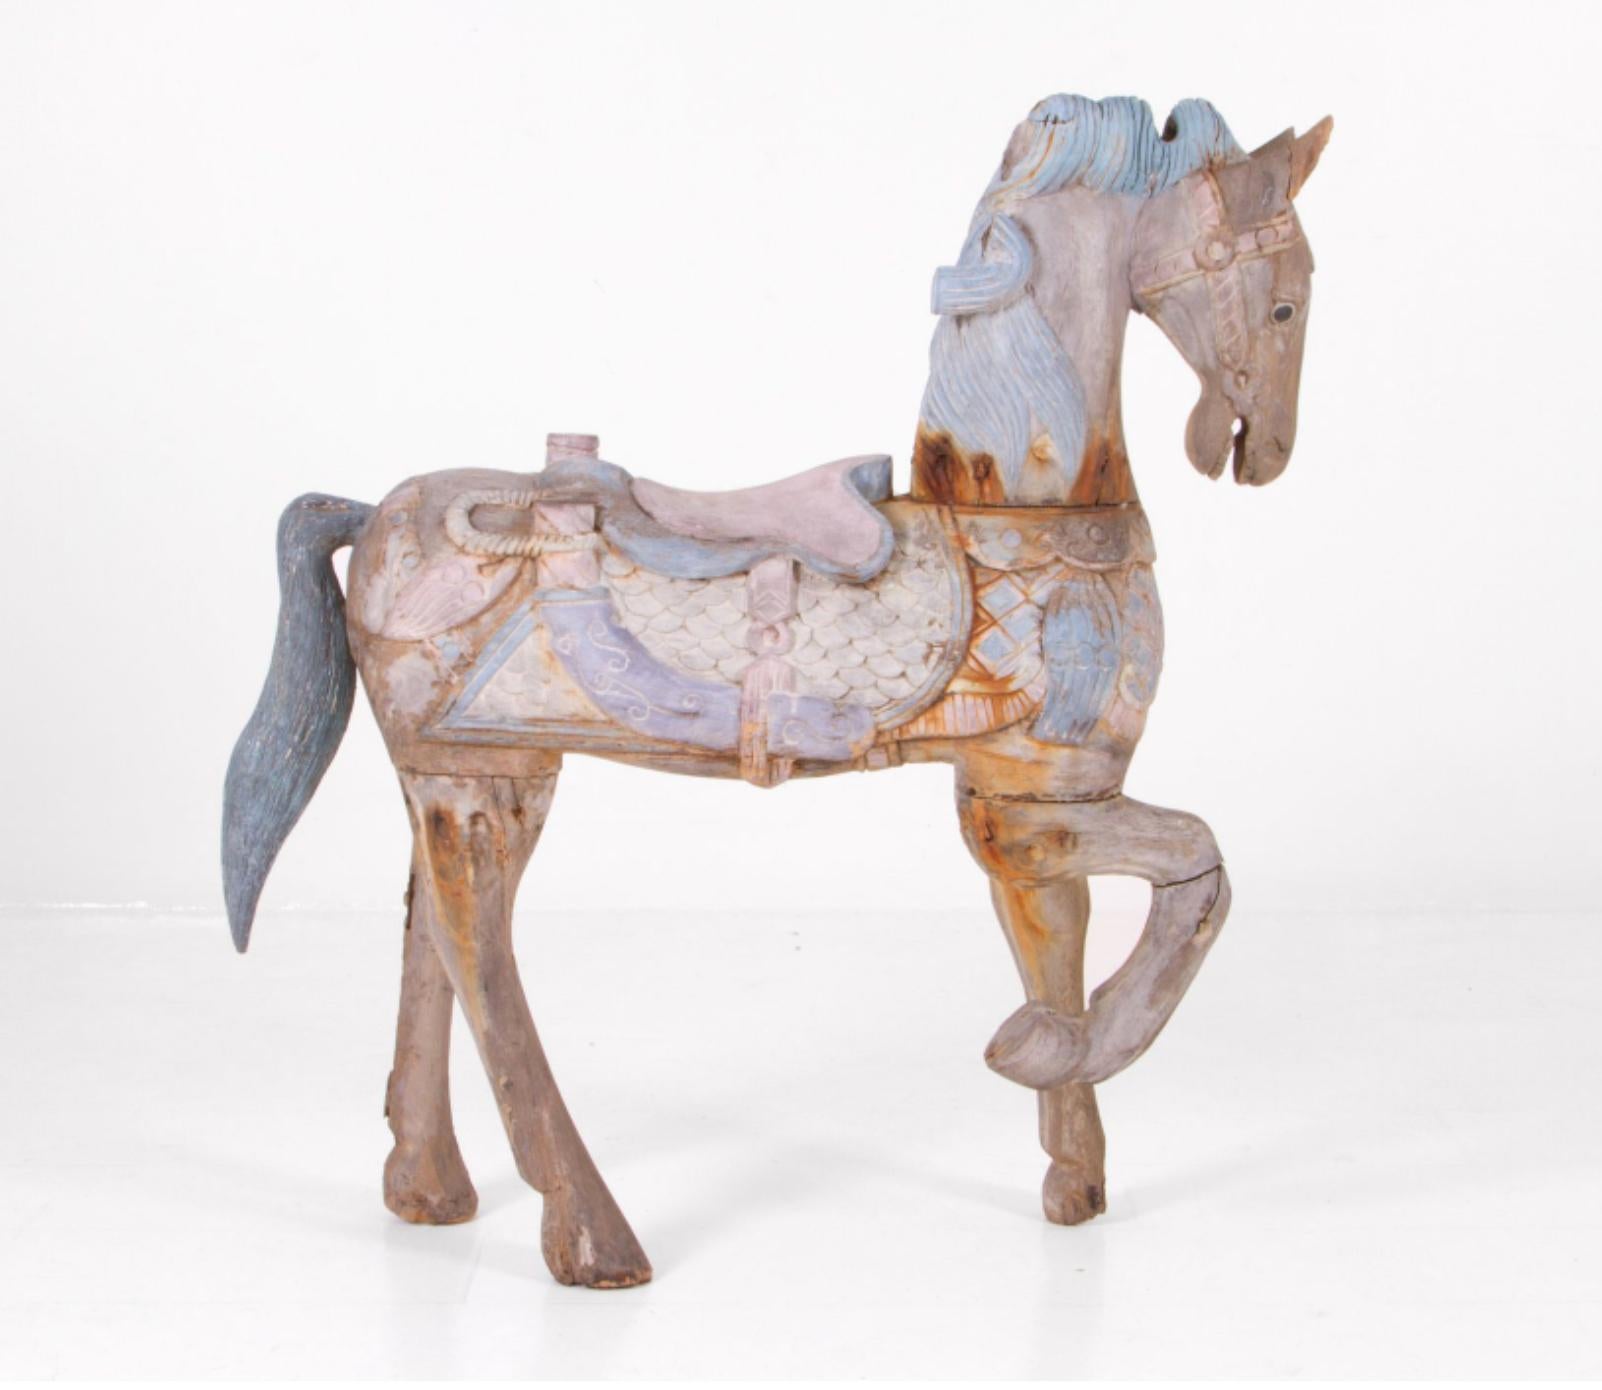 Extraordinary hand carved rocking horse made in Italy at the end of 19th century. The piece is still wearing its authentic paint in light blue, rose and velvet. The condition is fine and the wear is consistent with the age and use. There were no